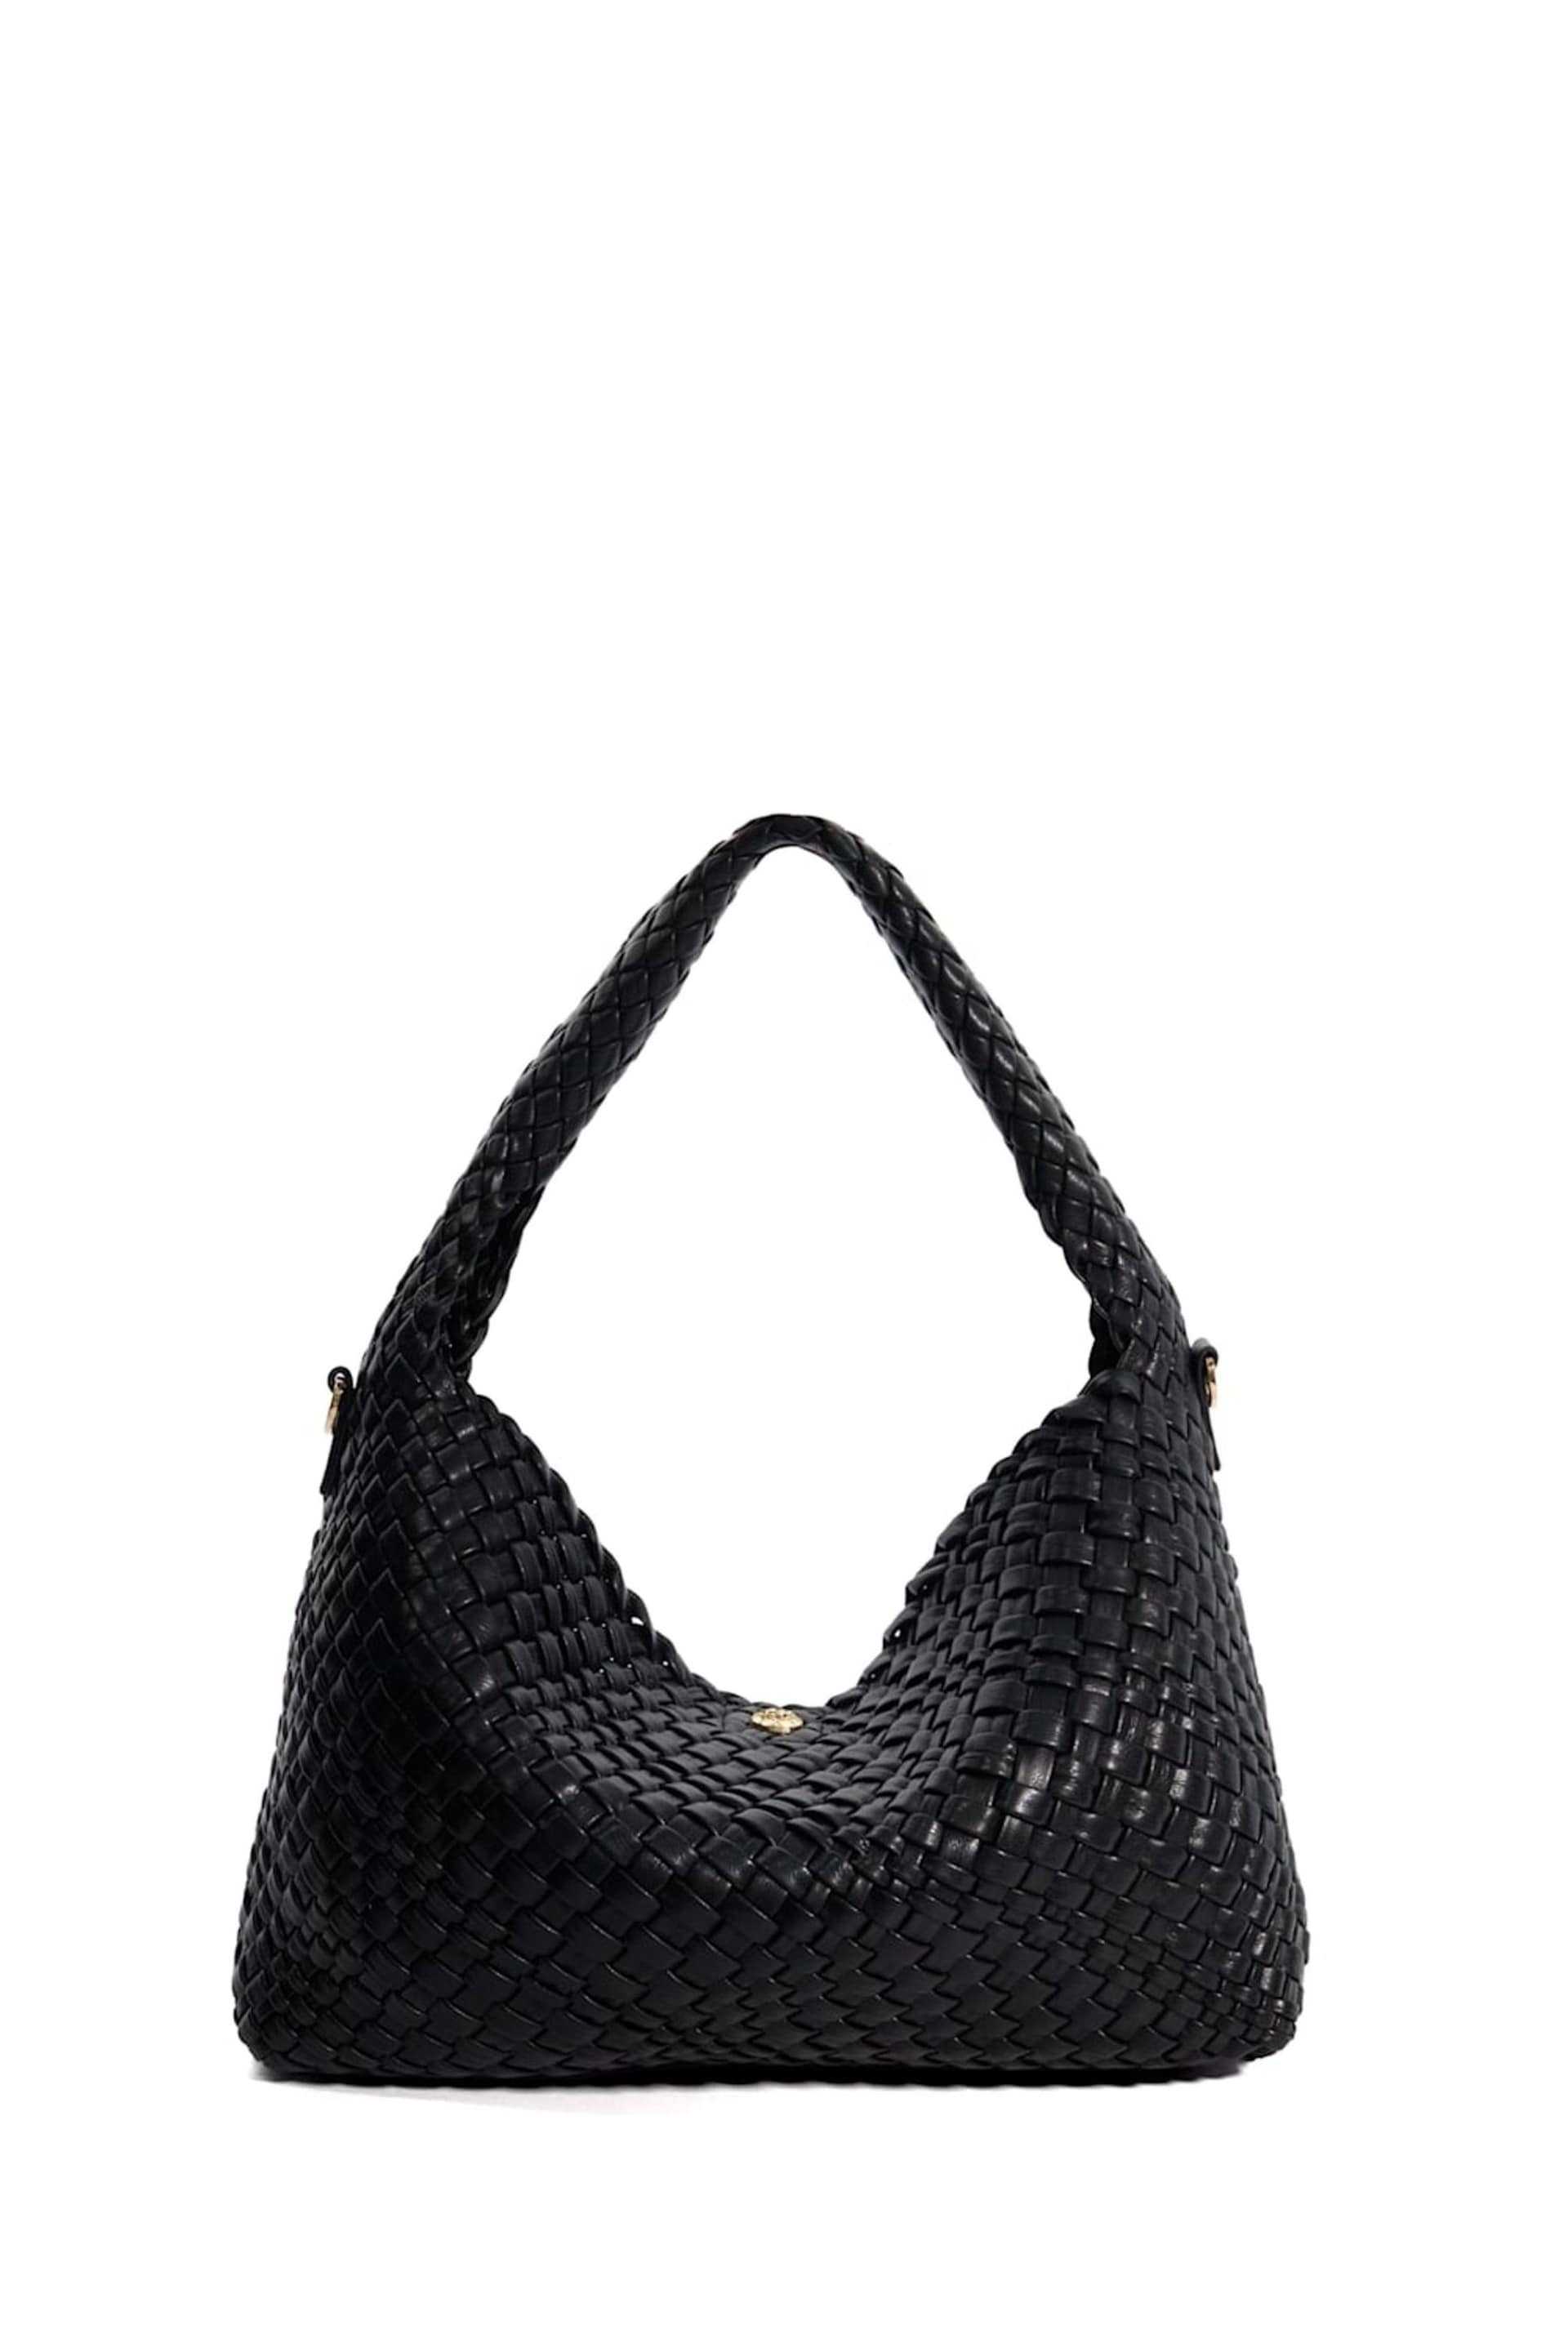 Dune London Black Large Deliberate Woven Slouch Bag - Image 4 of 7